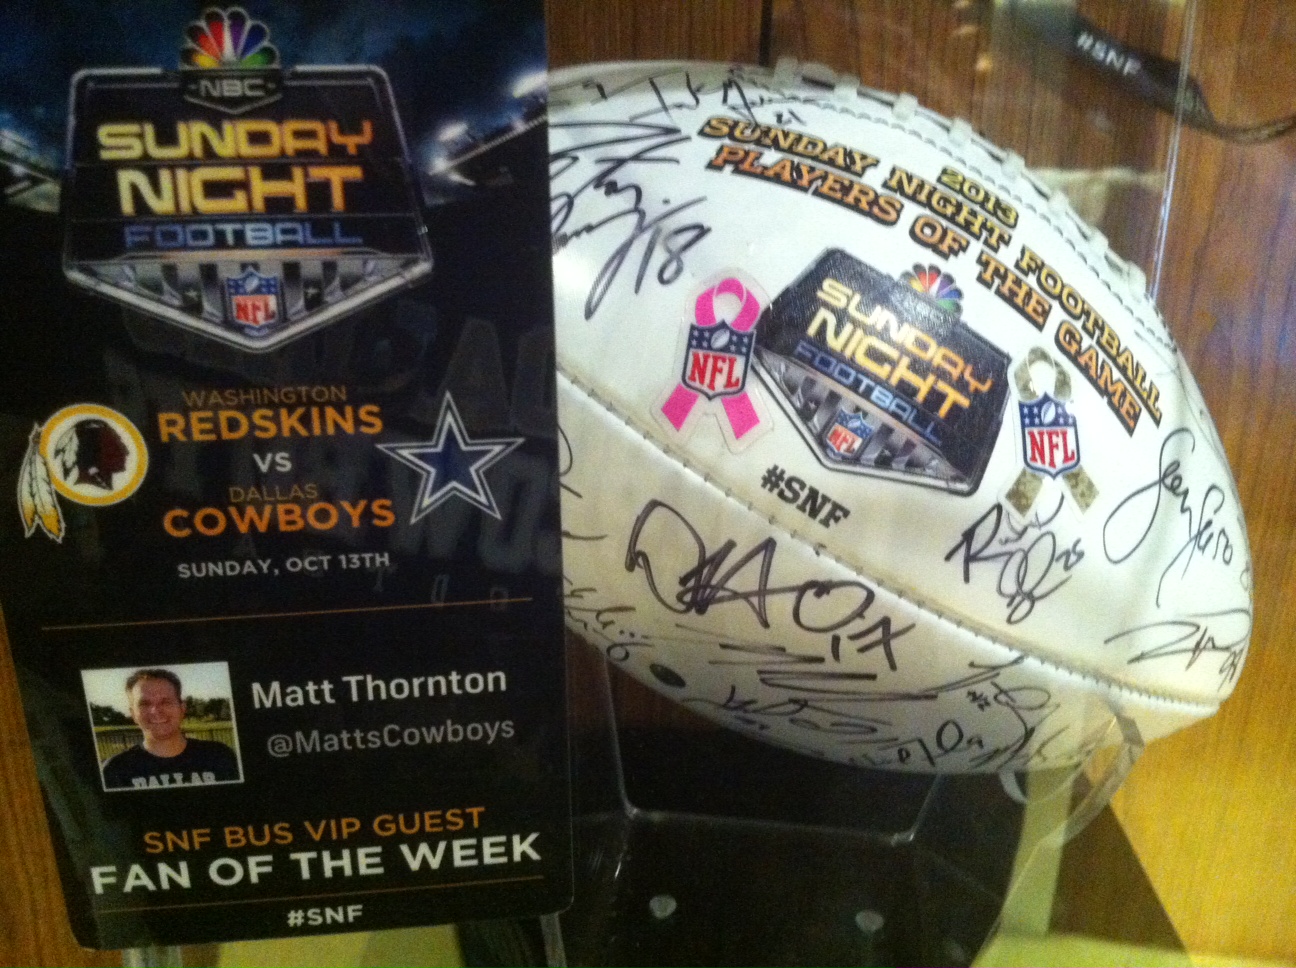 NBC Sunday Night Football Week 6 Fan of the Week Credential - Special Guest